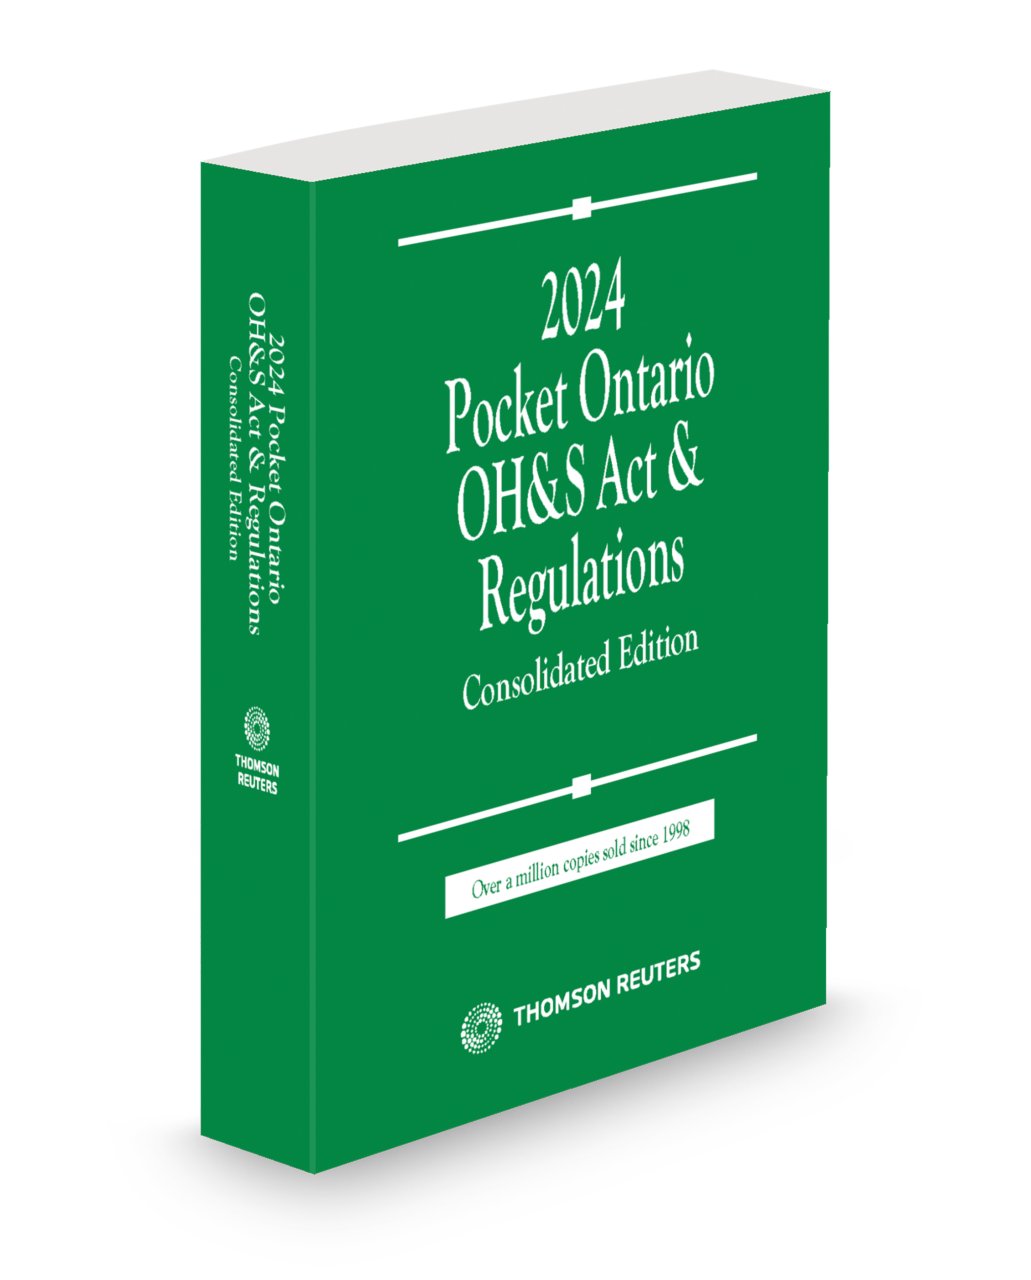 Front cover image for the Pocket Ontario OH&S Act and Regulations 2024 - Consolidated Edition (The 'Green Book').